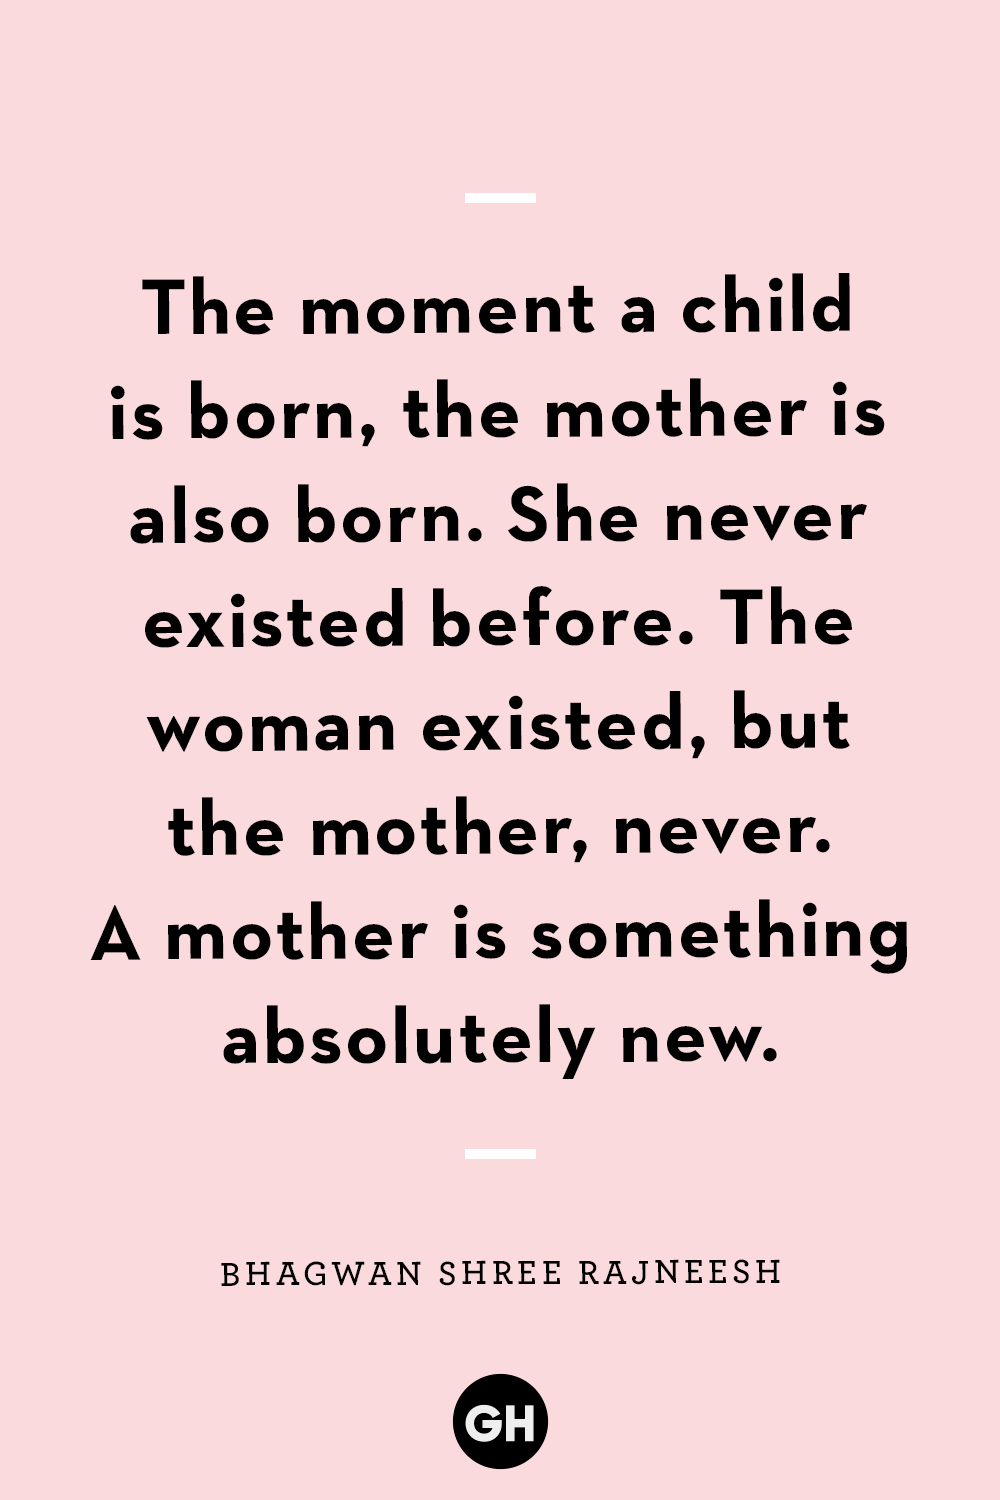 40 Best New Mom Quotes Wise Sayings For First Time Parents